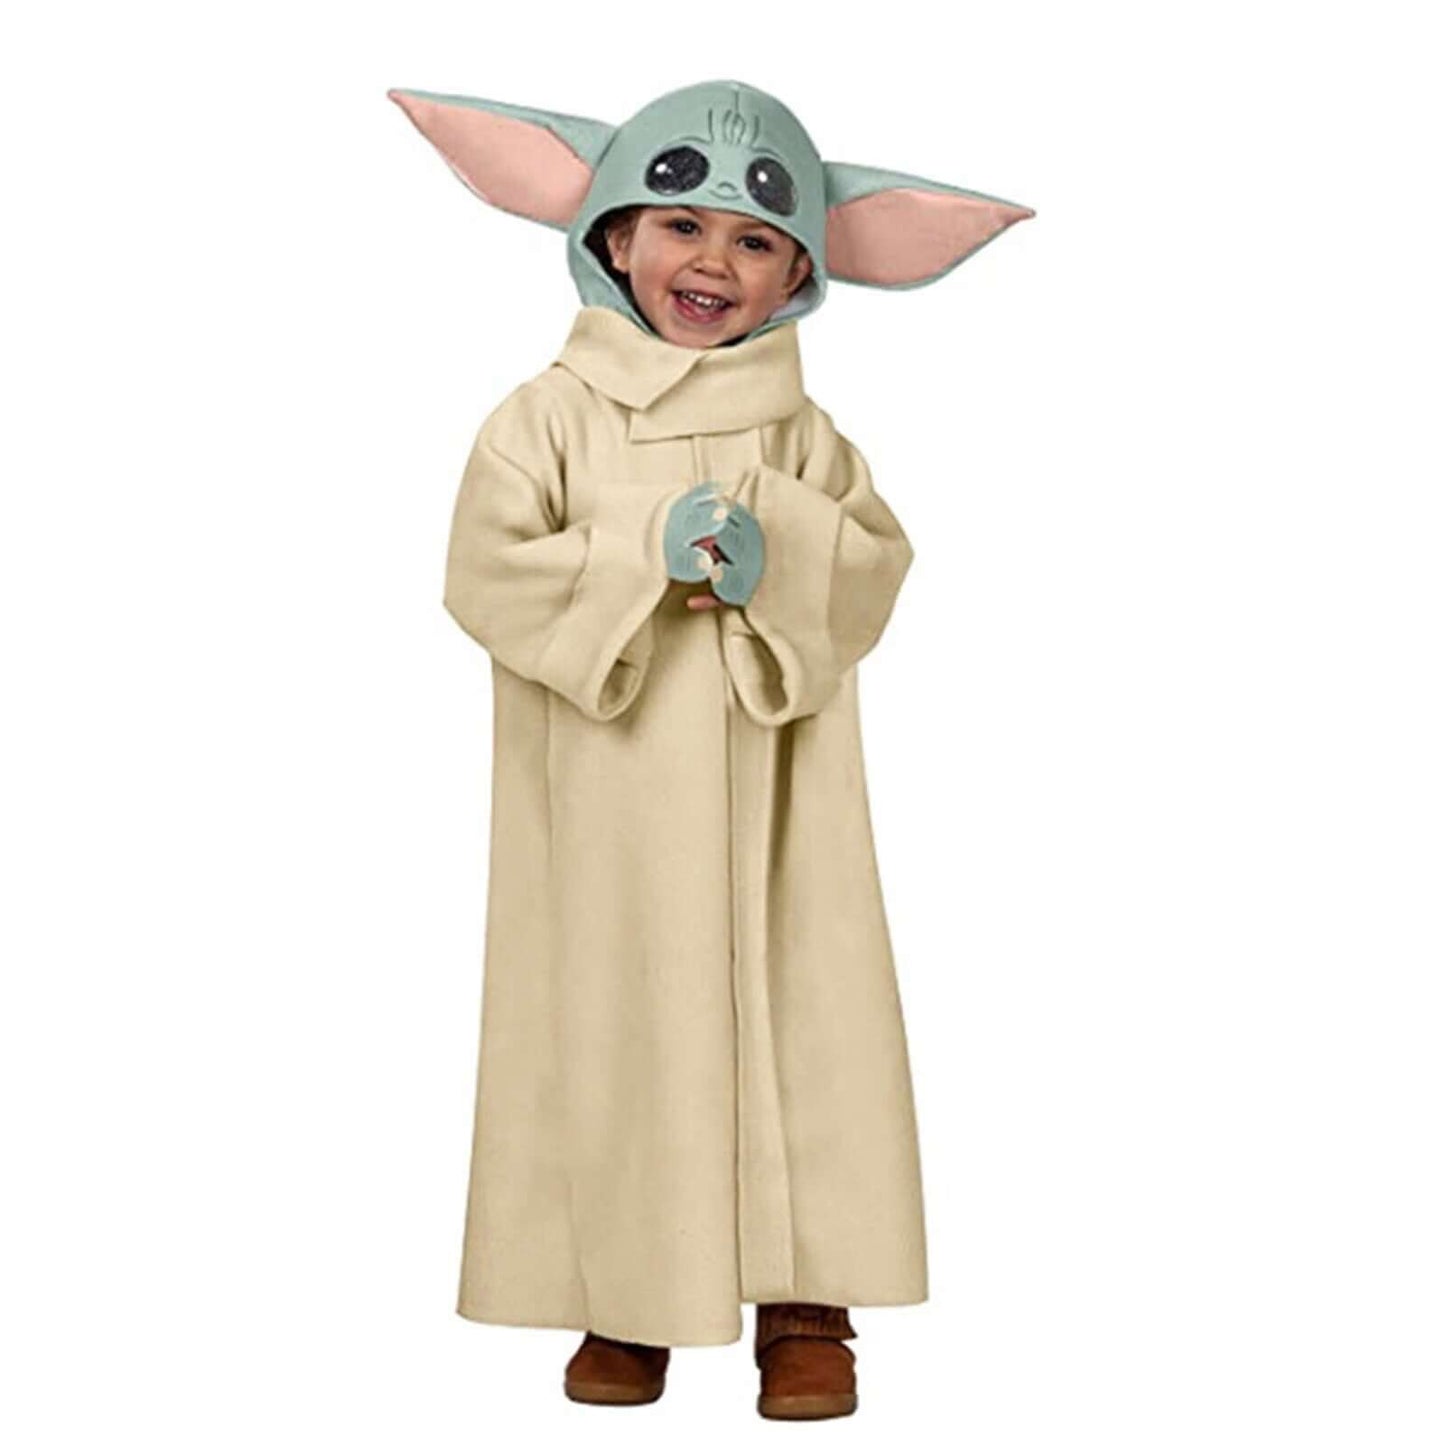 Baby Yoda Costume Kids Cosplay Coat with Headpiece attached Hand Covers